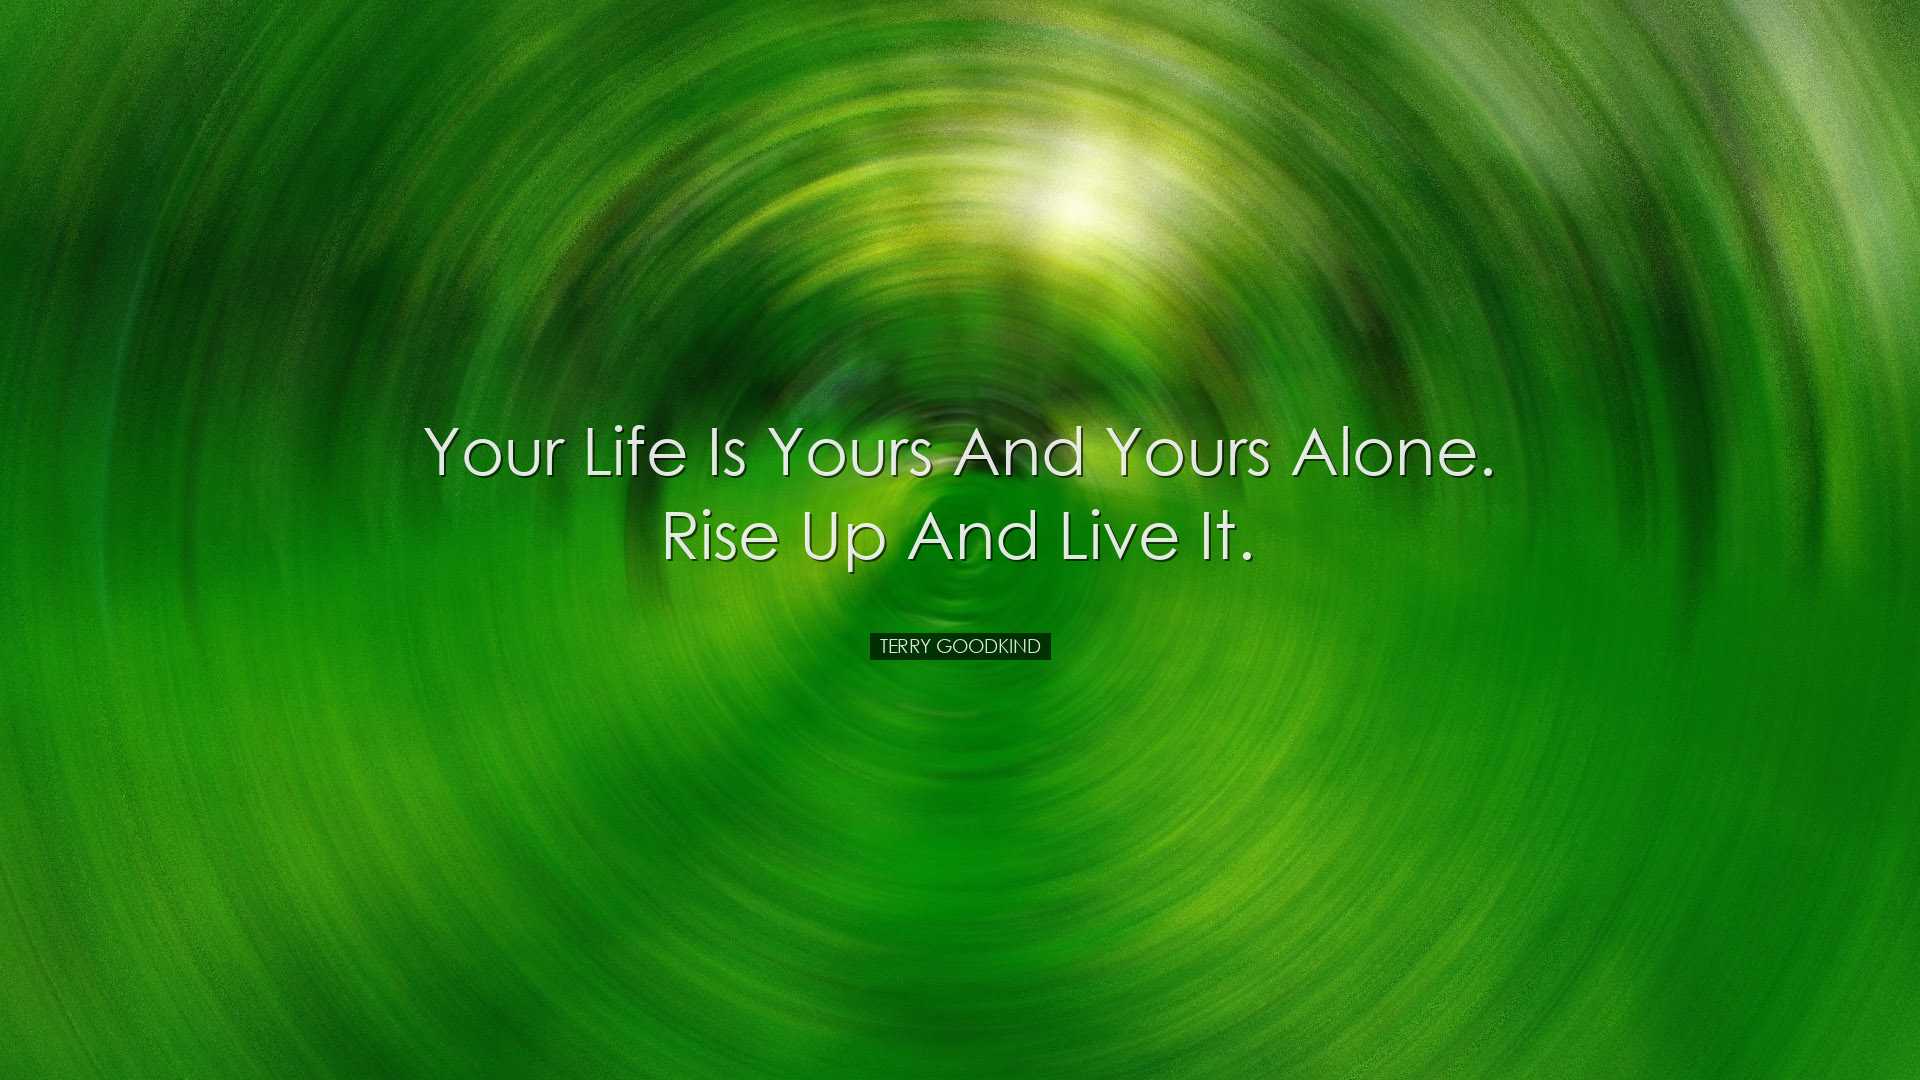 Your life is yours and yours alone. Rise up and live it. - Terry G